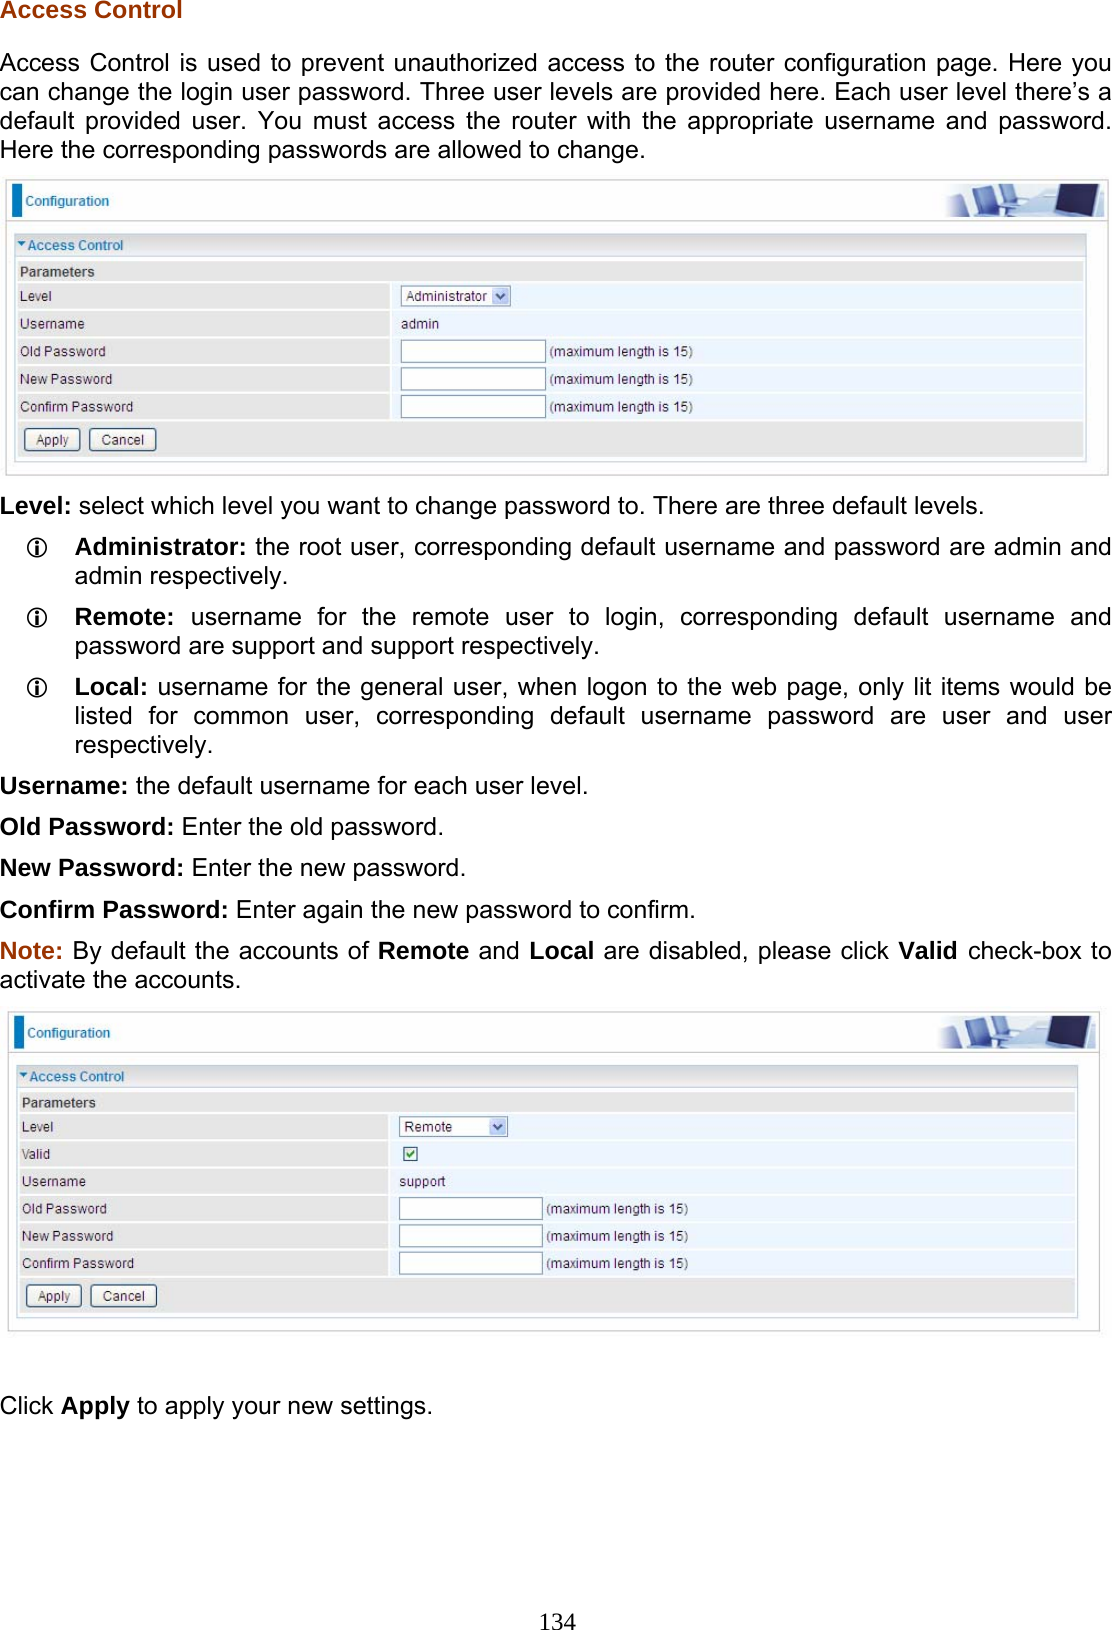 134 Access Control Access Control is used to prevent unauthorized access to the router configuration page. Here you can change the login user password. Three user levels are provided here. Each user level there’s a default provided user. You must access the router with the appropriate username and password. Here the corresponding passwords are allowed to change.   Level: select which level you want to change password to. There are three default levels.  Administrator: the root user, corresponding default username and password are admin and admin respectively.  Remote:  username for the remote user to login, corresponding default username and password are support and support respectively.   Local: username for the general user, when logon to the web page, only lit items would be listed for common user, corresponding default username password are user and user respectively. Username: the default username for each user level. Old Password: Enter the old password. New Password: Enter the new password. Confirm Password: Enter again the new password to confirm.  Note: By default the accounts of Remote and Local are disabled, please click Valid check-box to activate the accounts.   Click Apply to apply your new settings.  